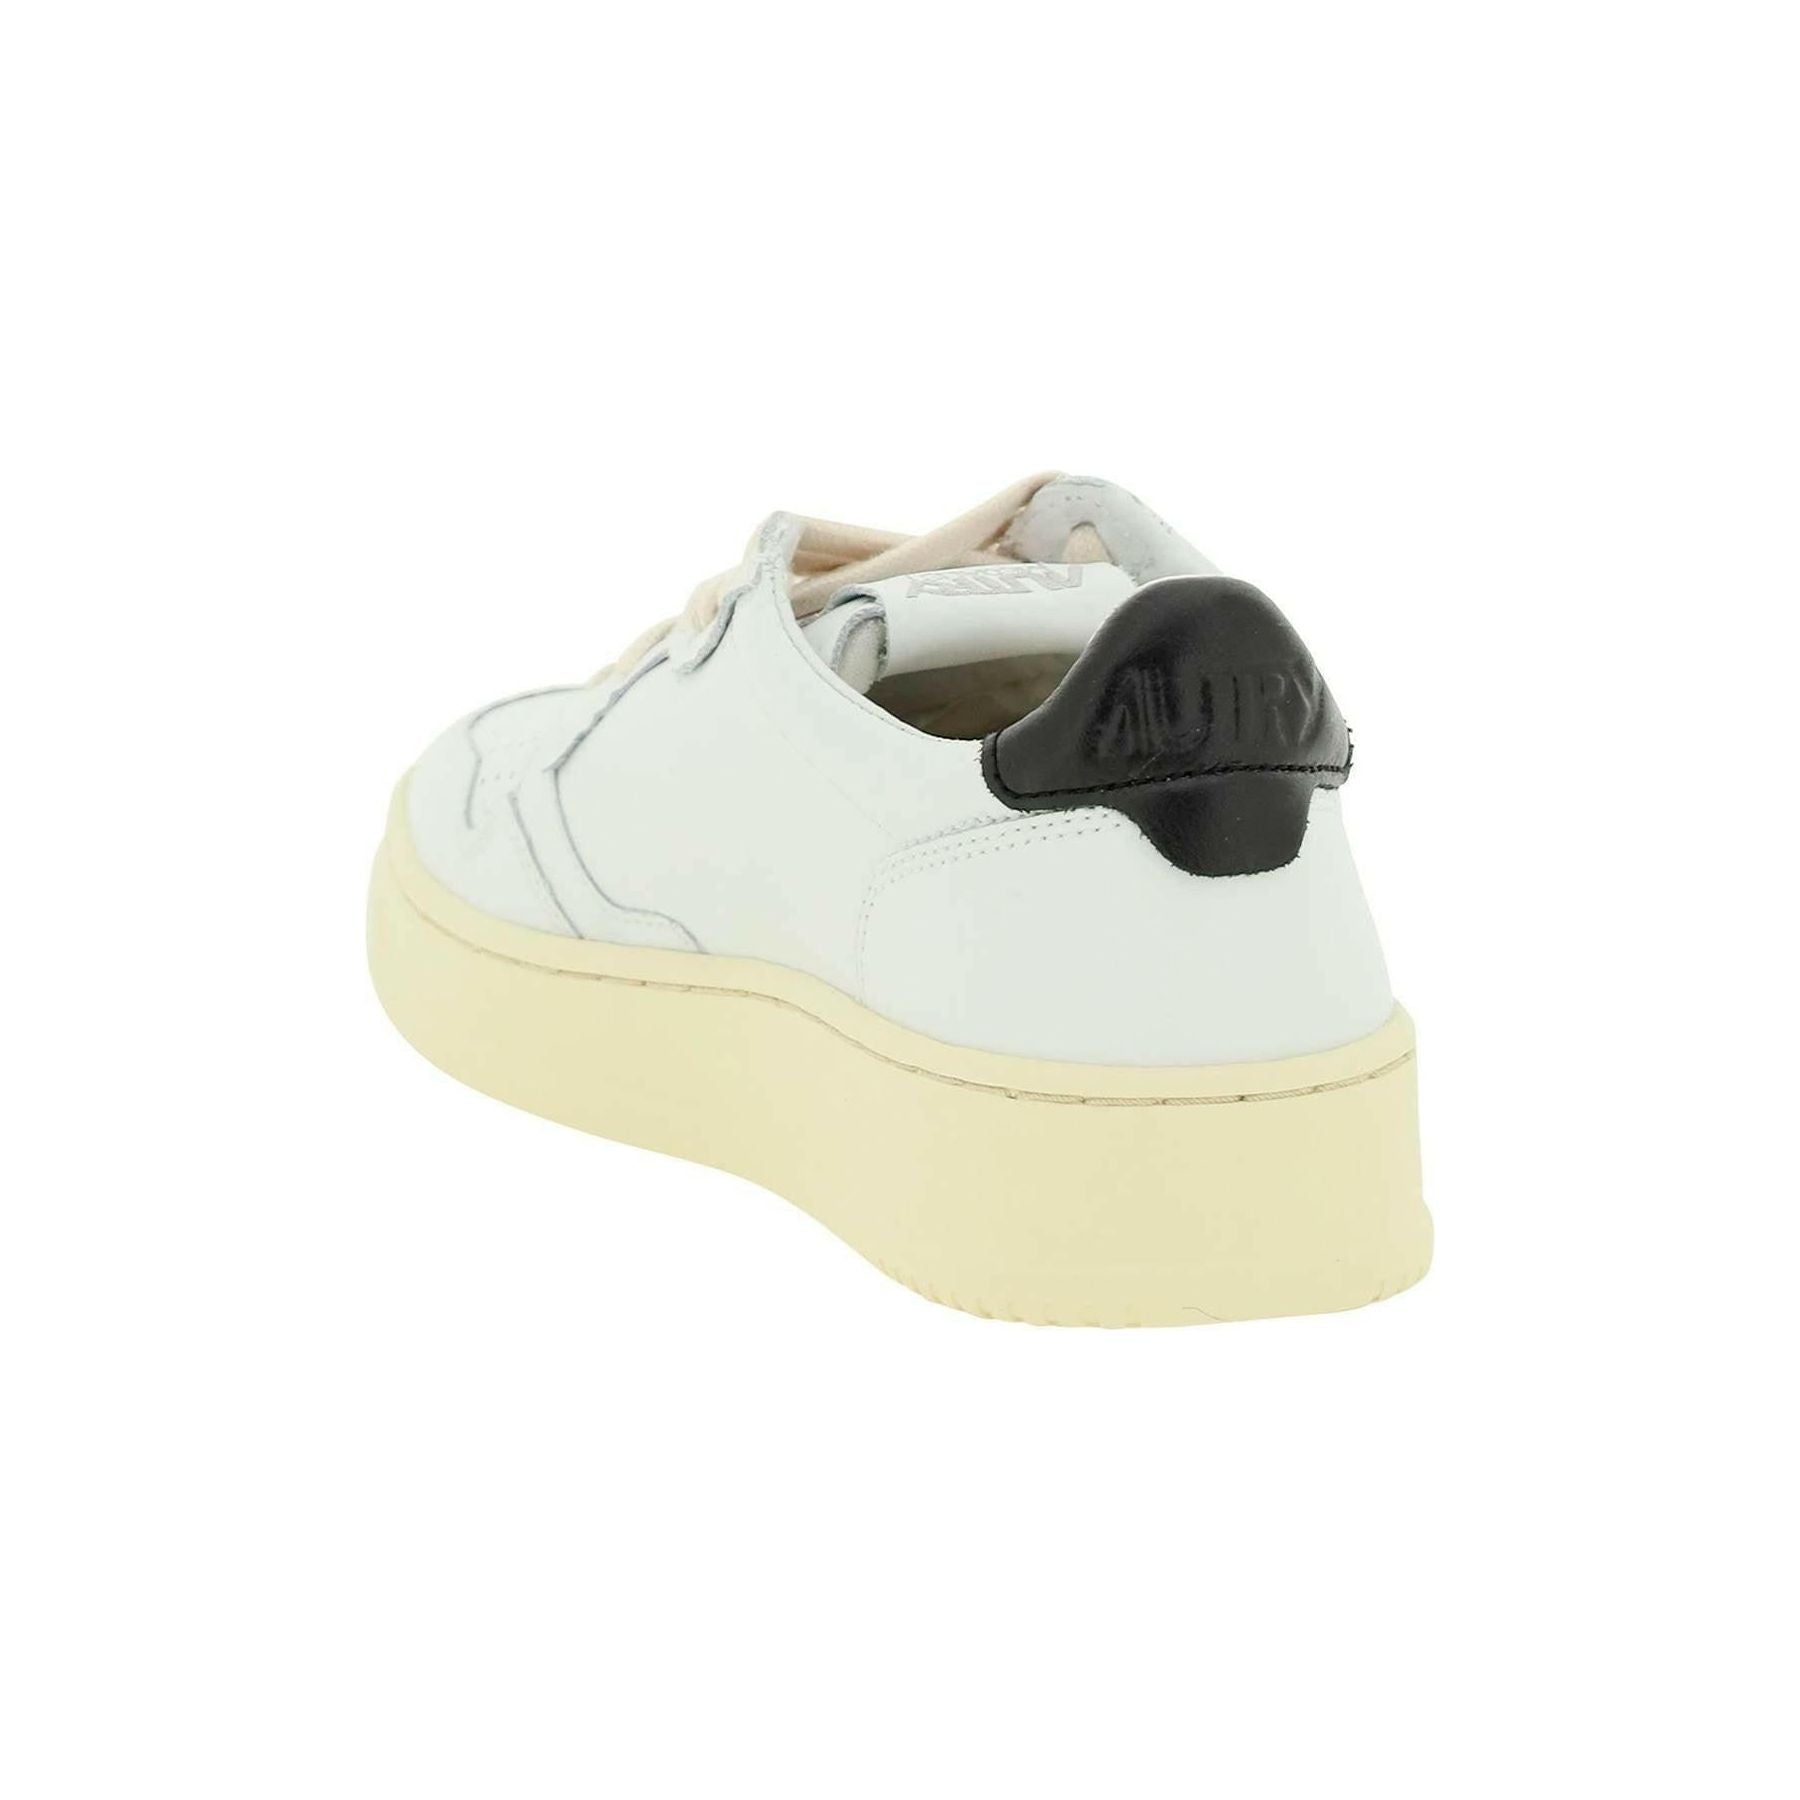 White and Black Leather Medalist Low Sneakers AUTRY JOHN JULIA.